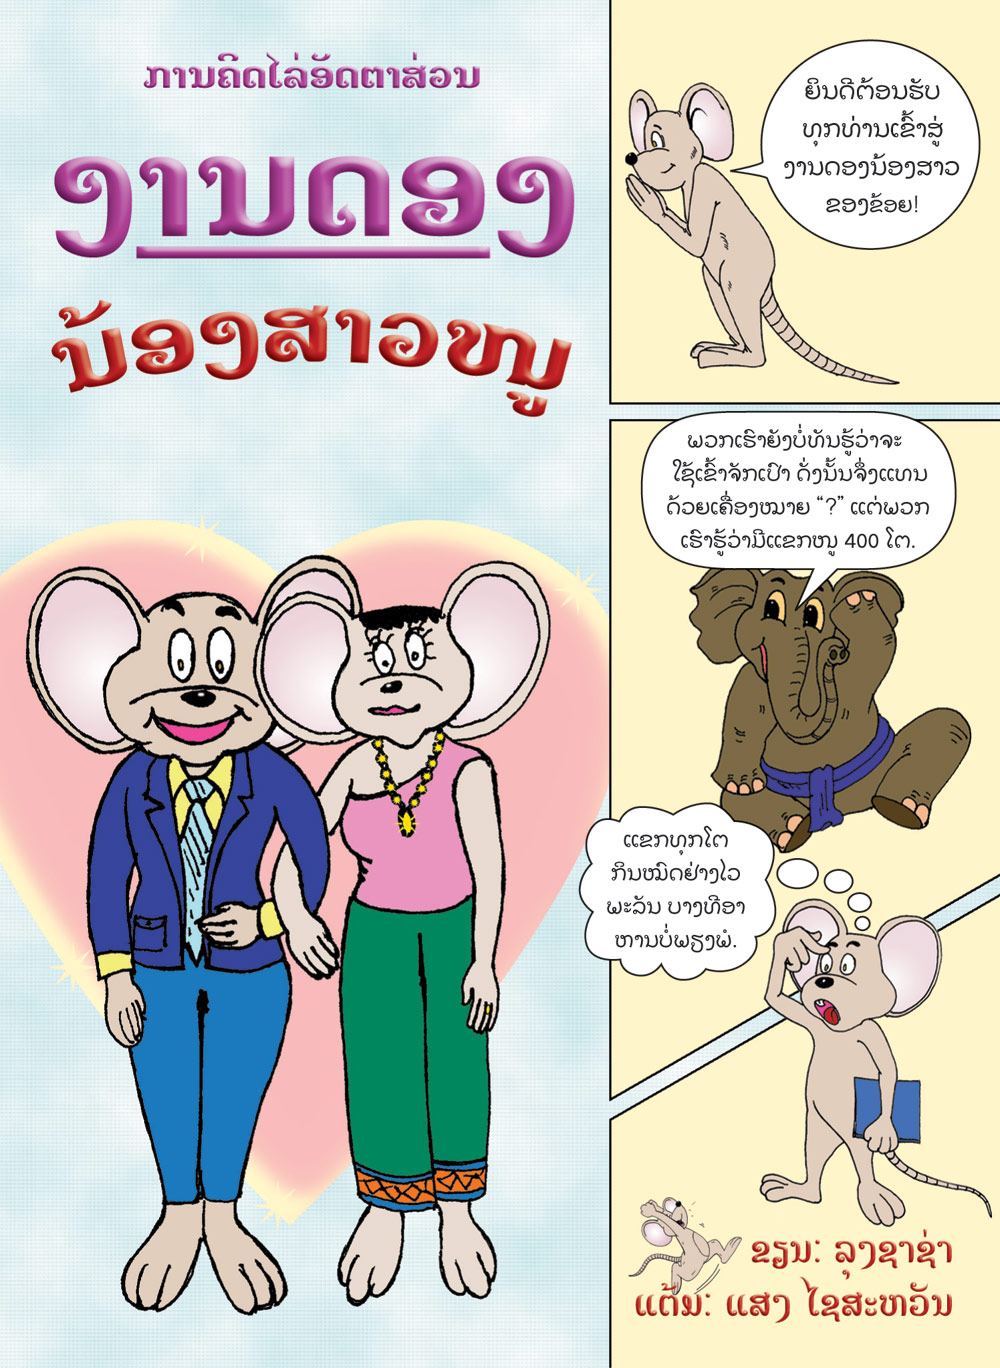 Sister Mouse's Wedding large book cover, published in Lao language